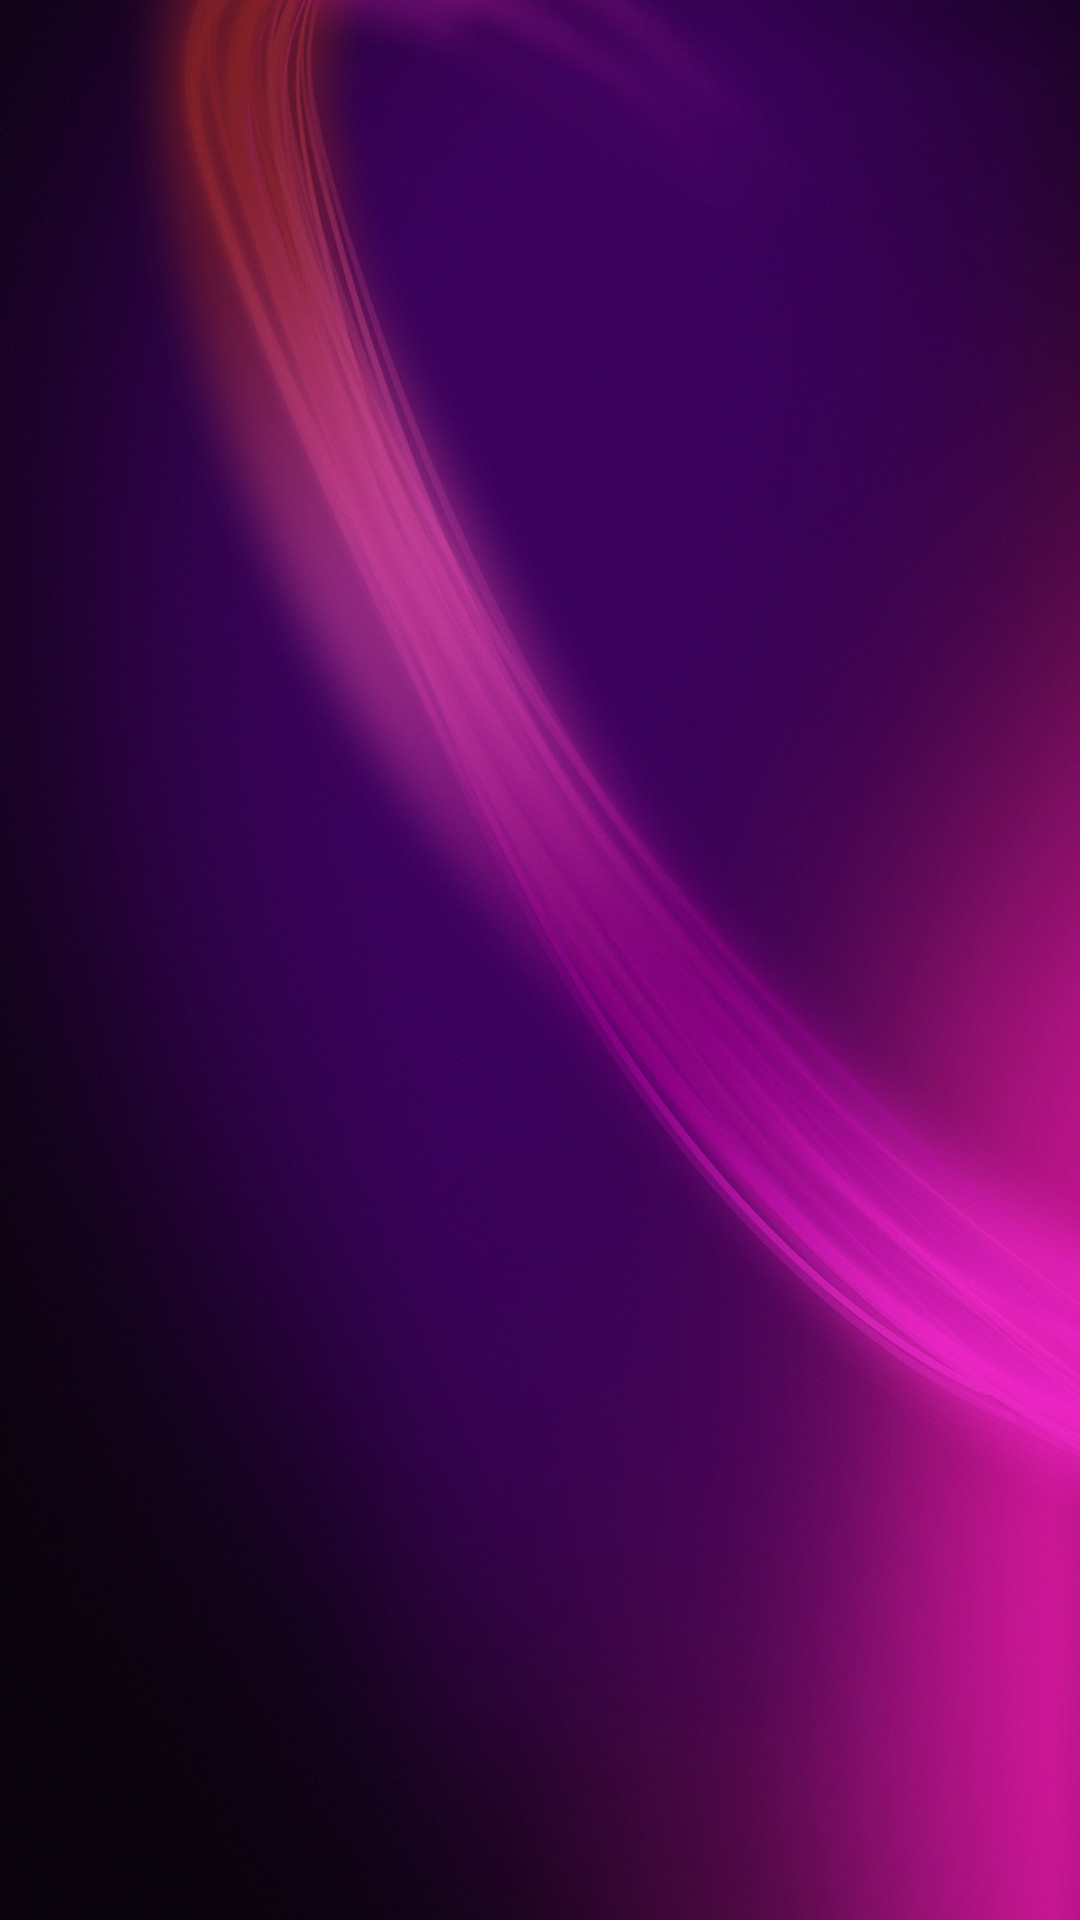 1080x1920 Amazing iPhone 6+ Wallpaper: Purple Abstract Swirl -  http://helpyourselfimages.